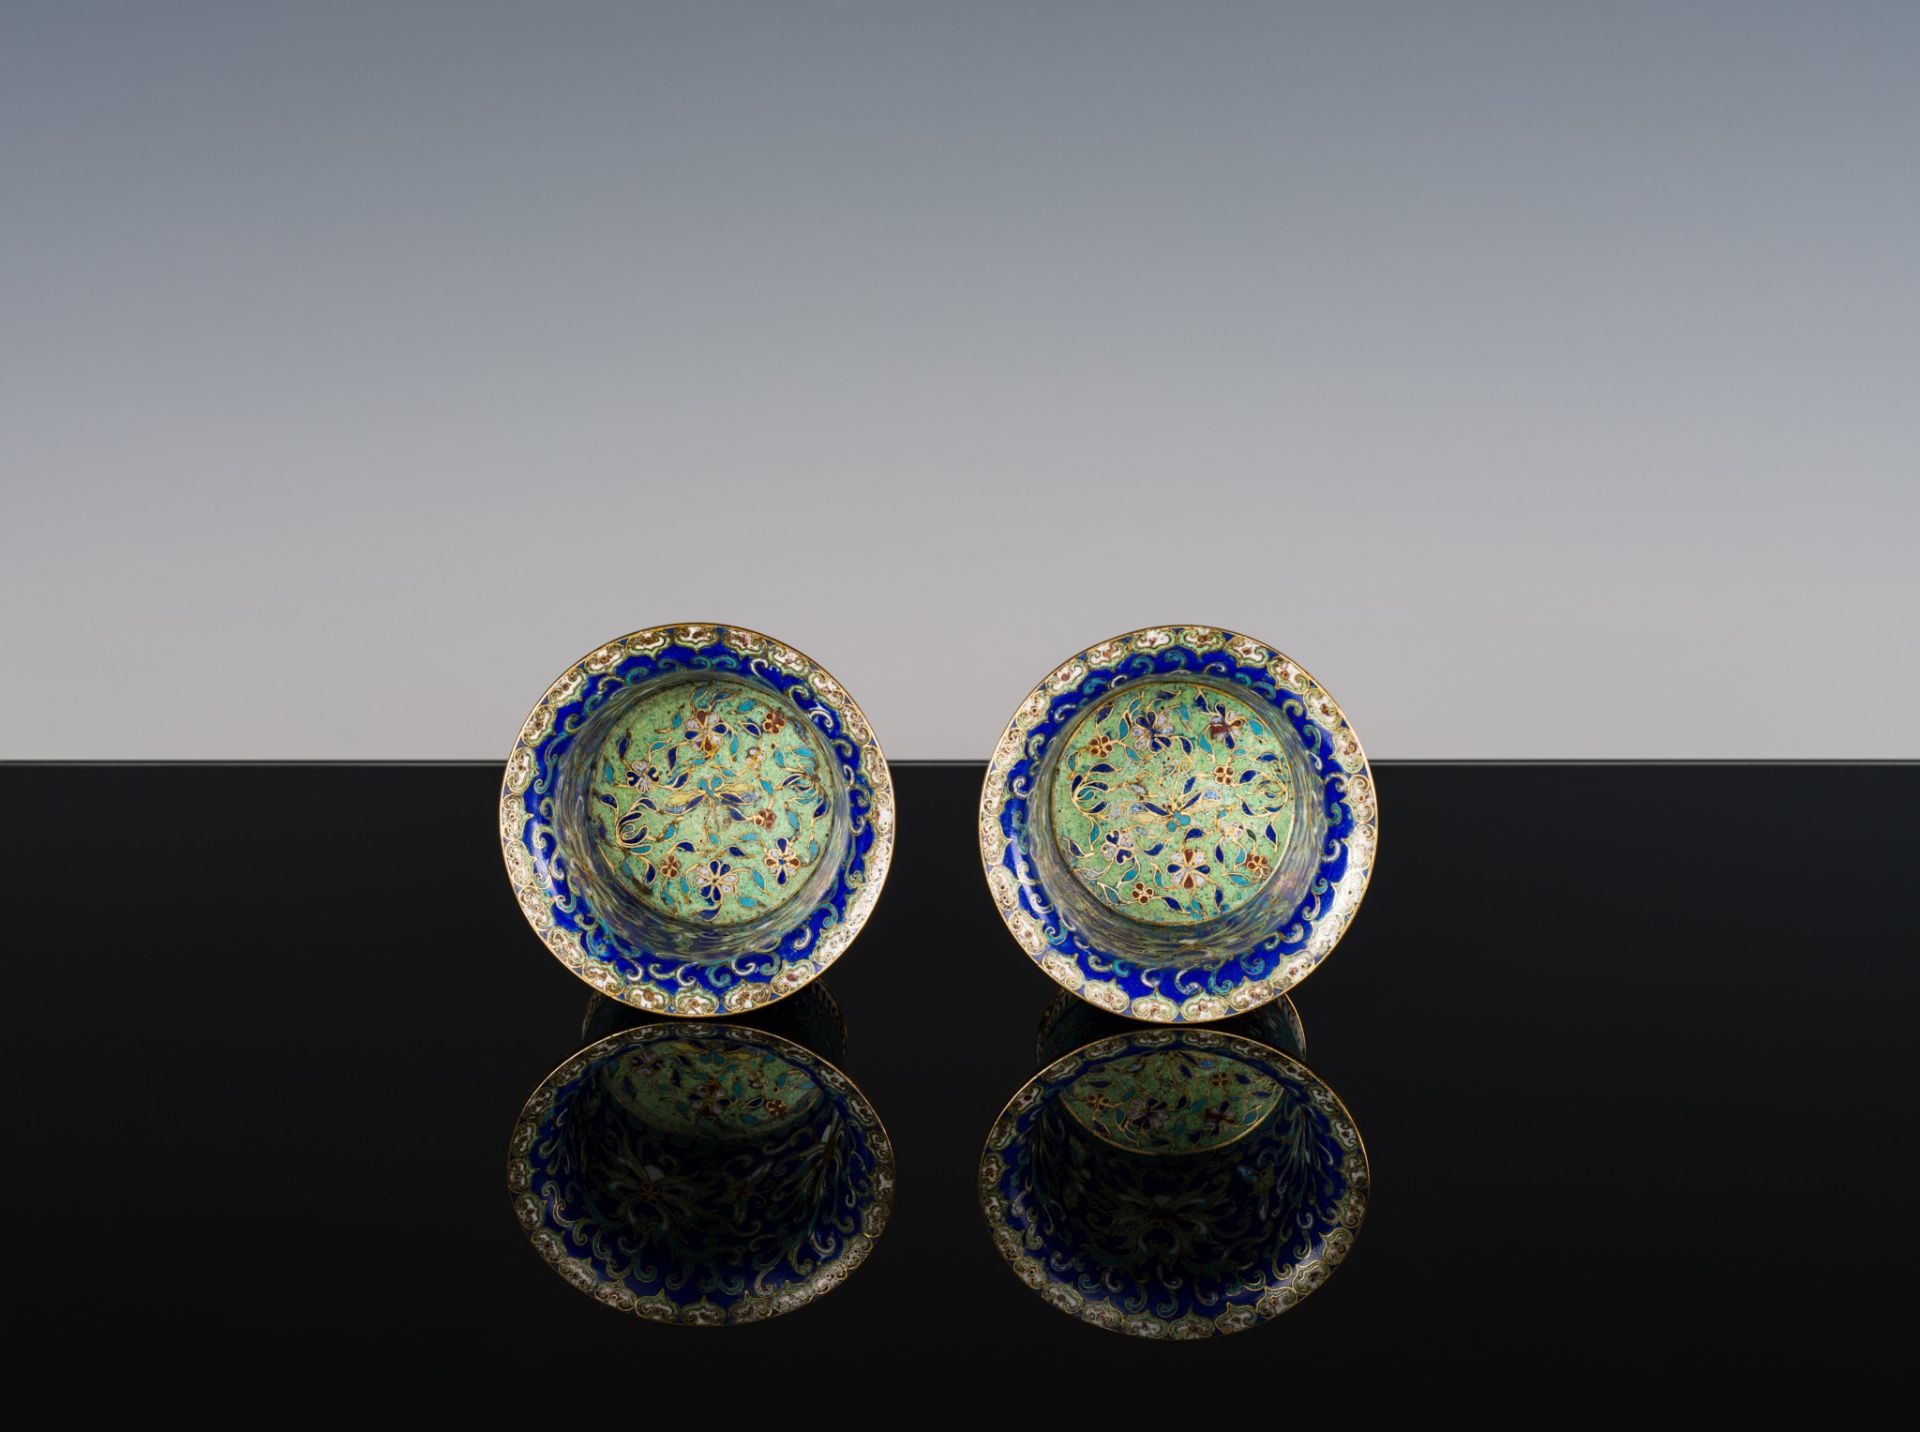 A SET OF TWO CLOISONNE ENAMEL WINE CUPS WITH MATCHING WARMERS, QING DYNASTY - Image 7 of 10